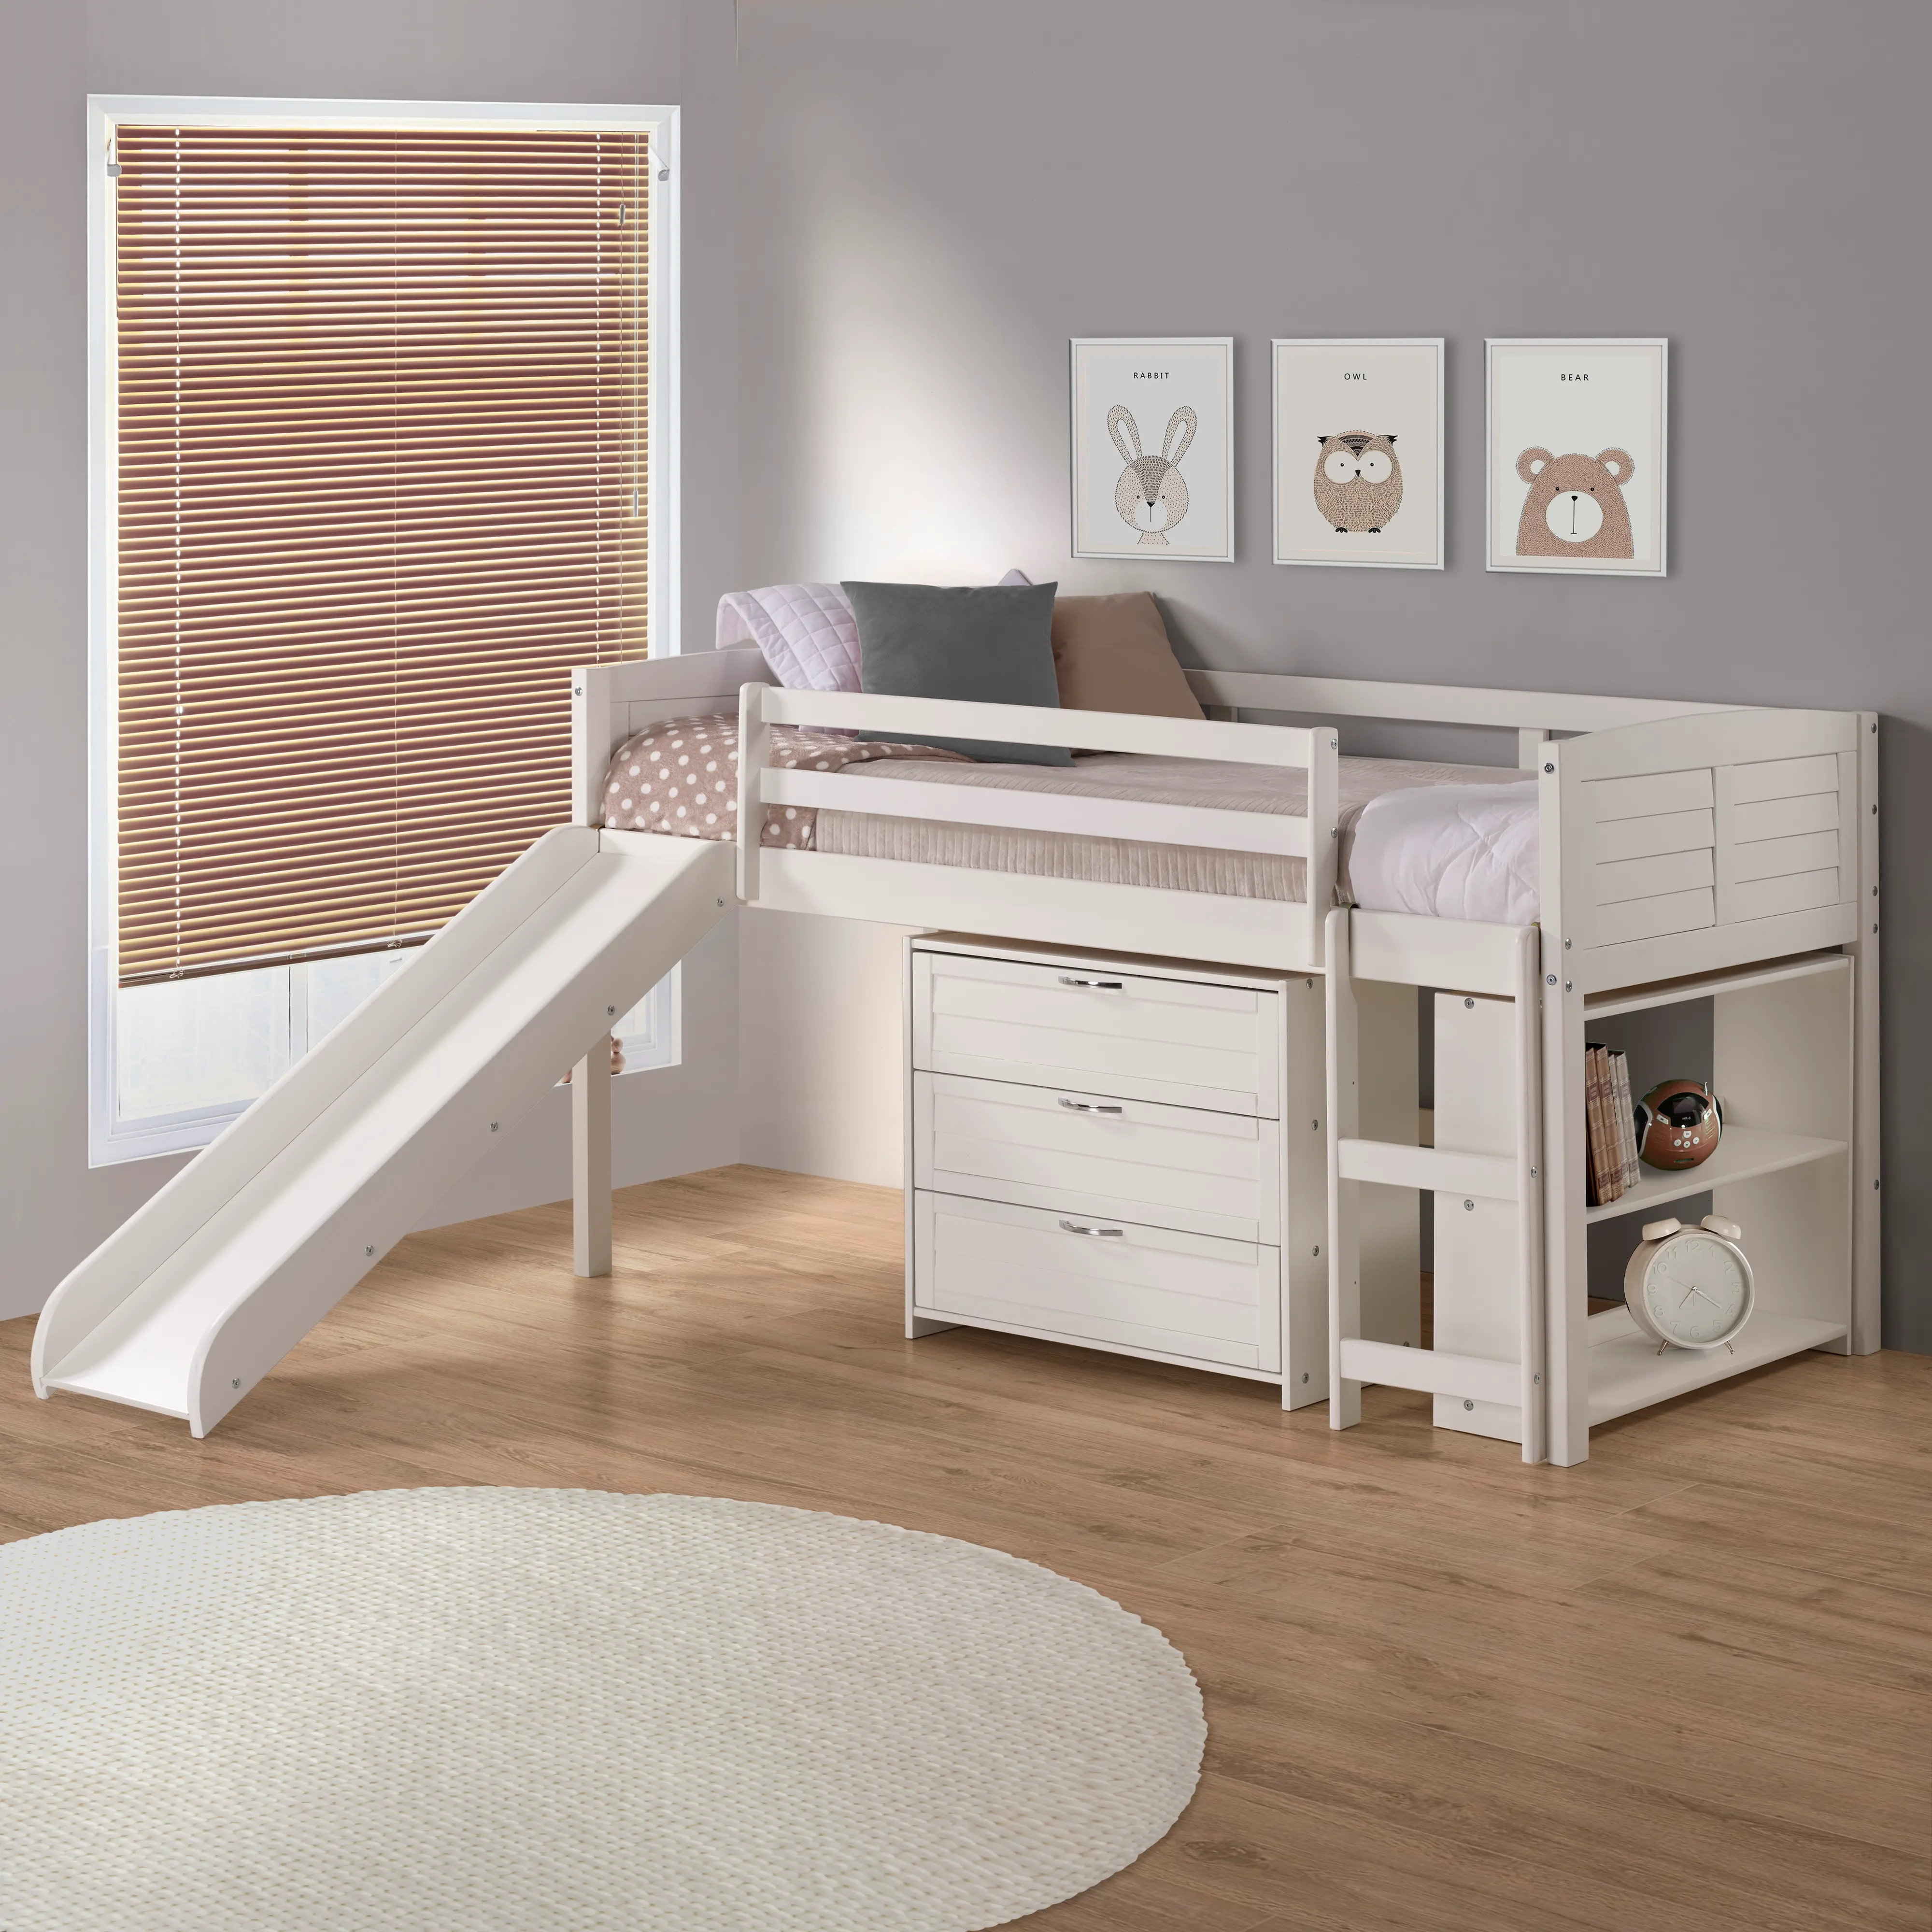 Photos - Bed Donco Trading Louver White Low Loft  Style F 790-TW-C 785-W